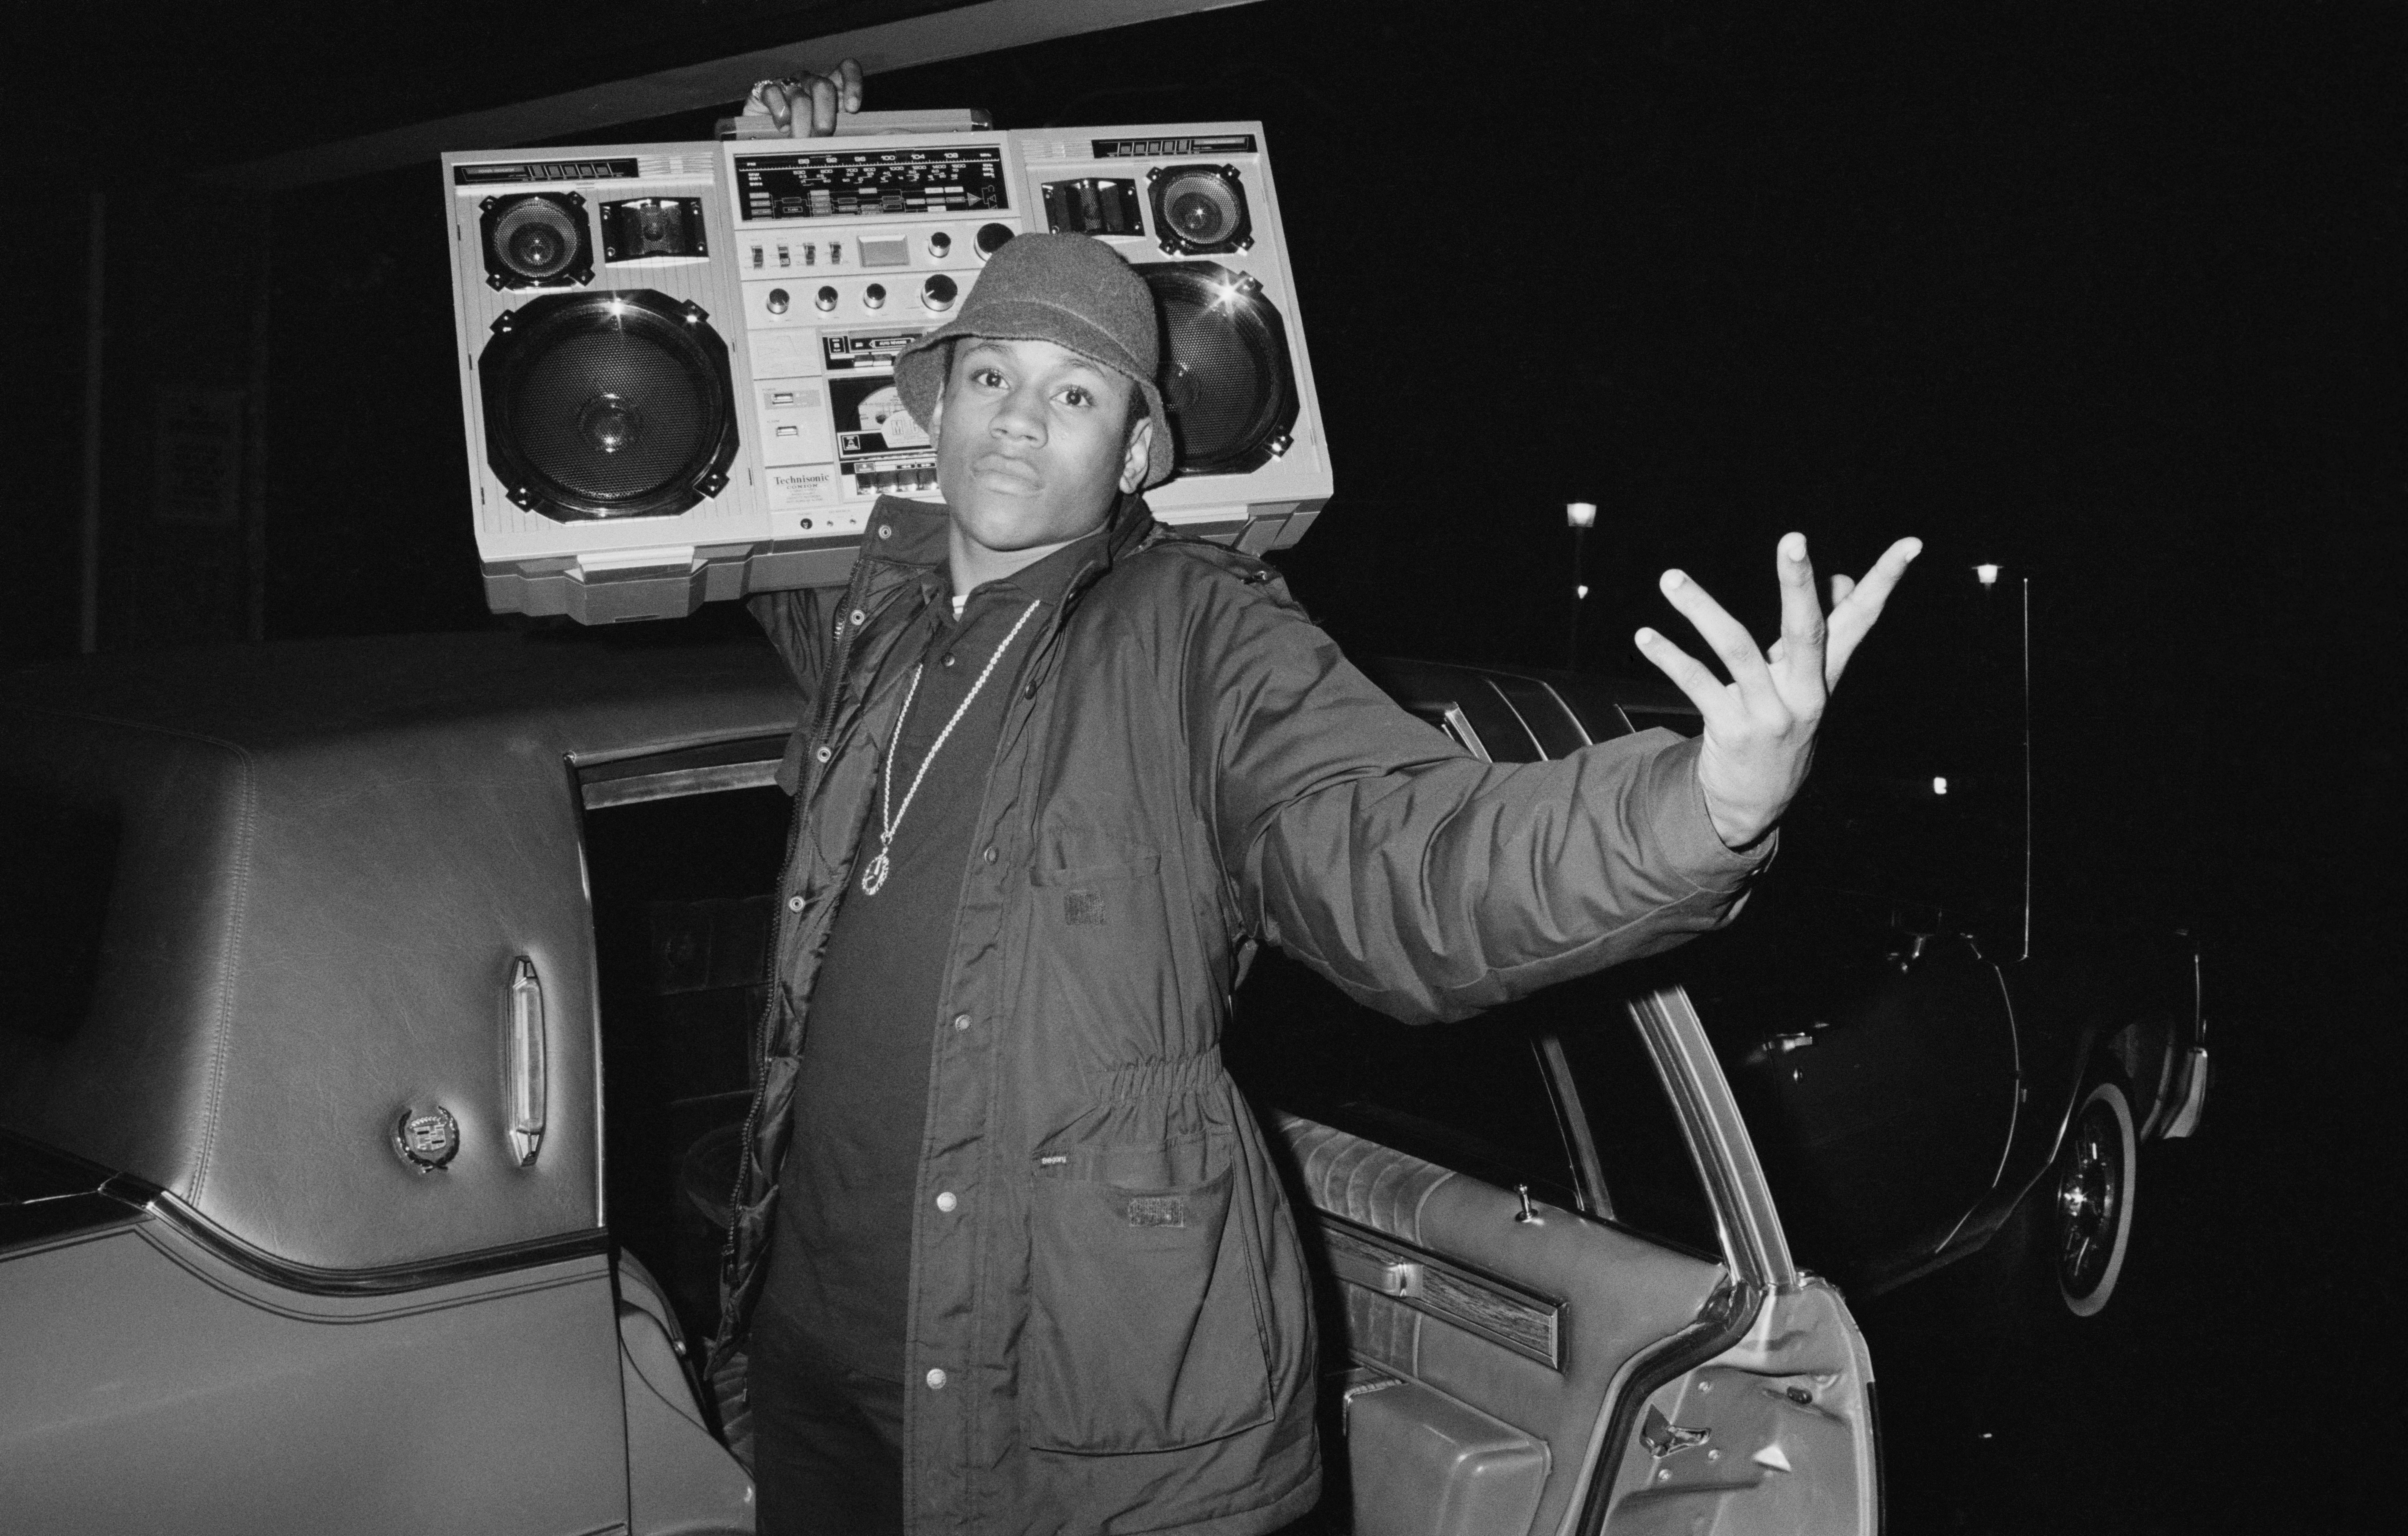 Rapper LL Cool J holds a boombox outside a concert in 1986. | Source: Michael Ochs Archives/Getty Images